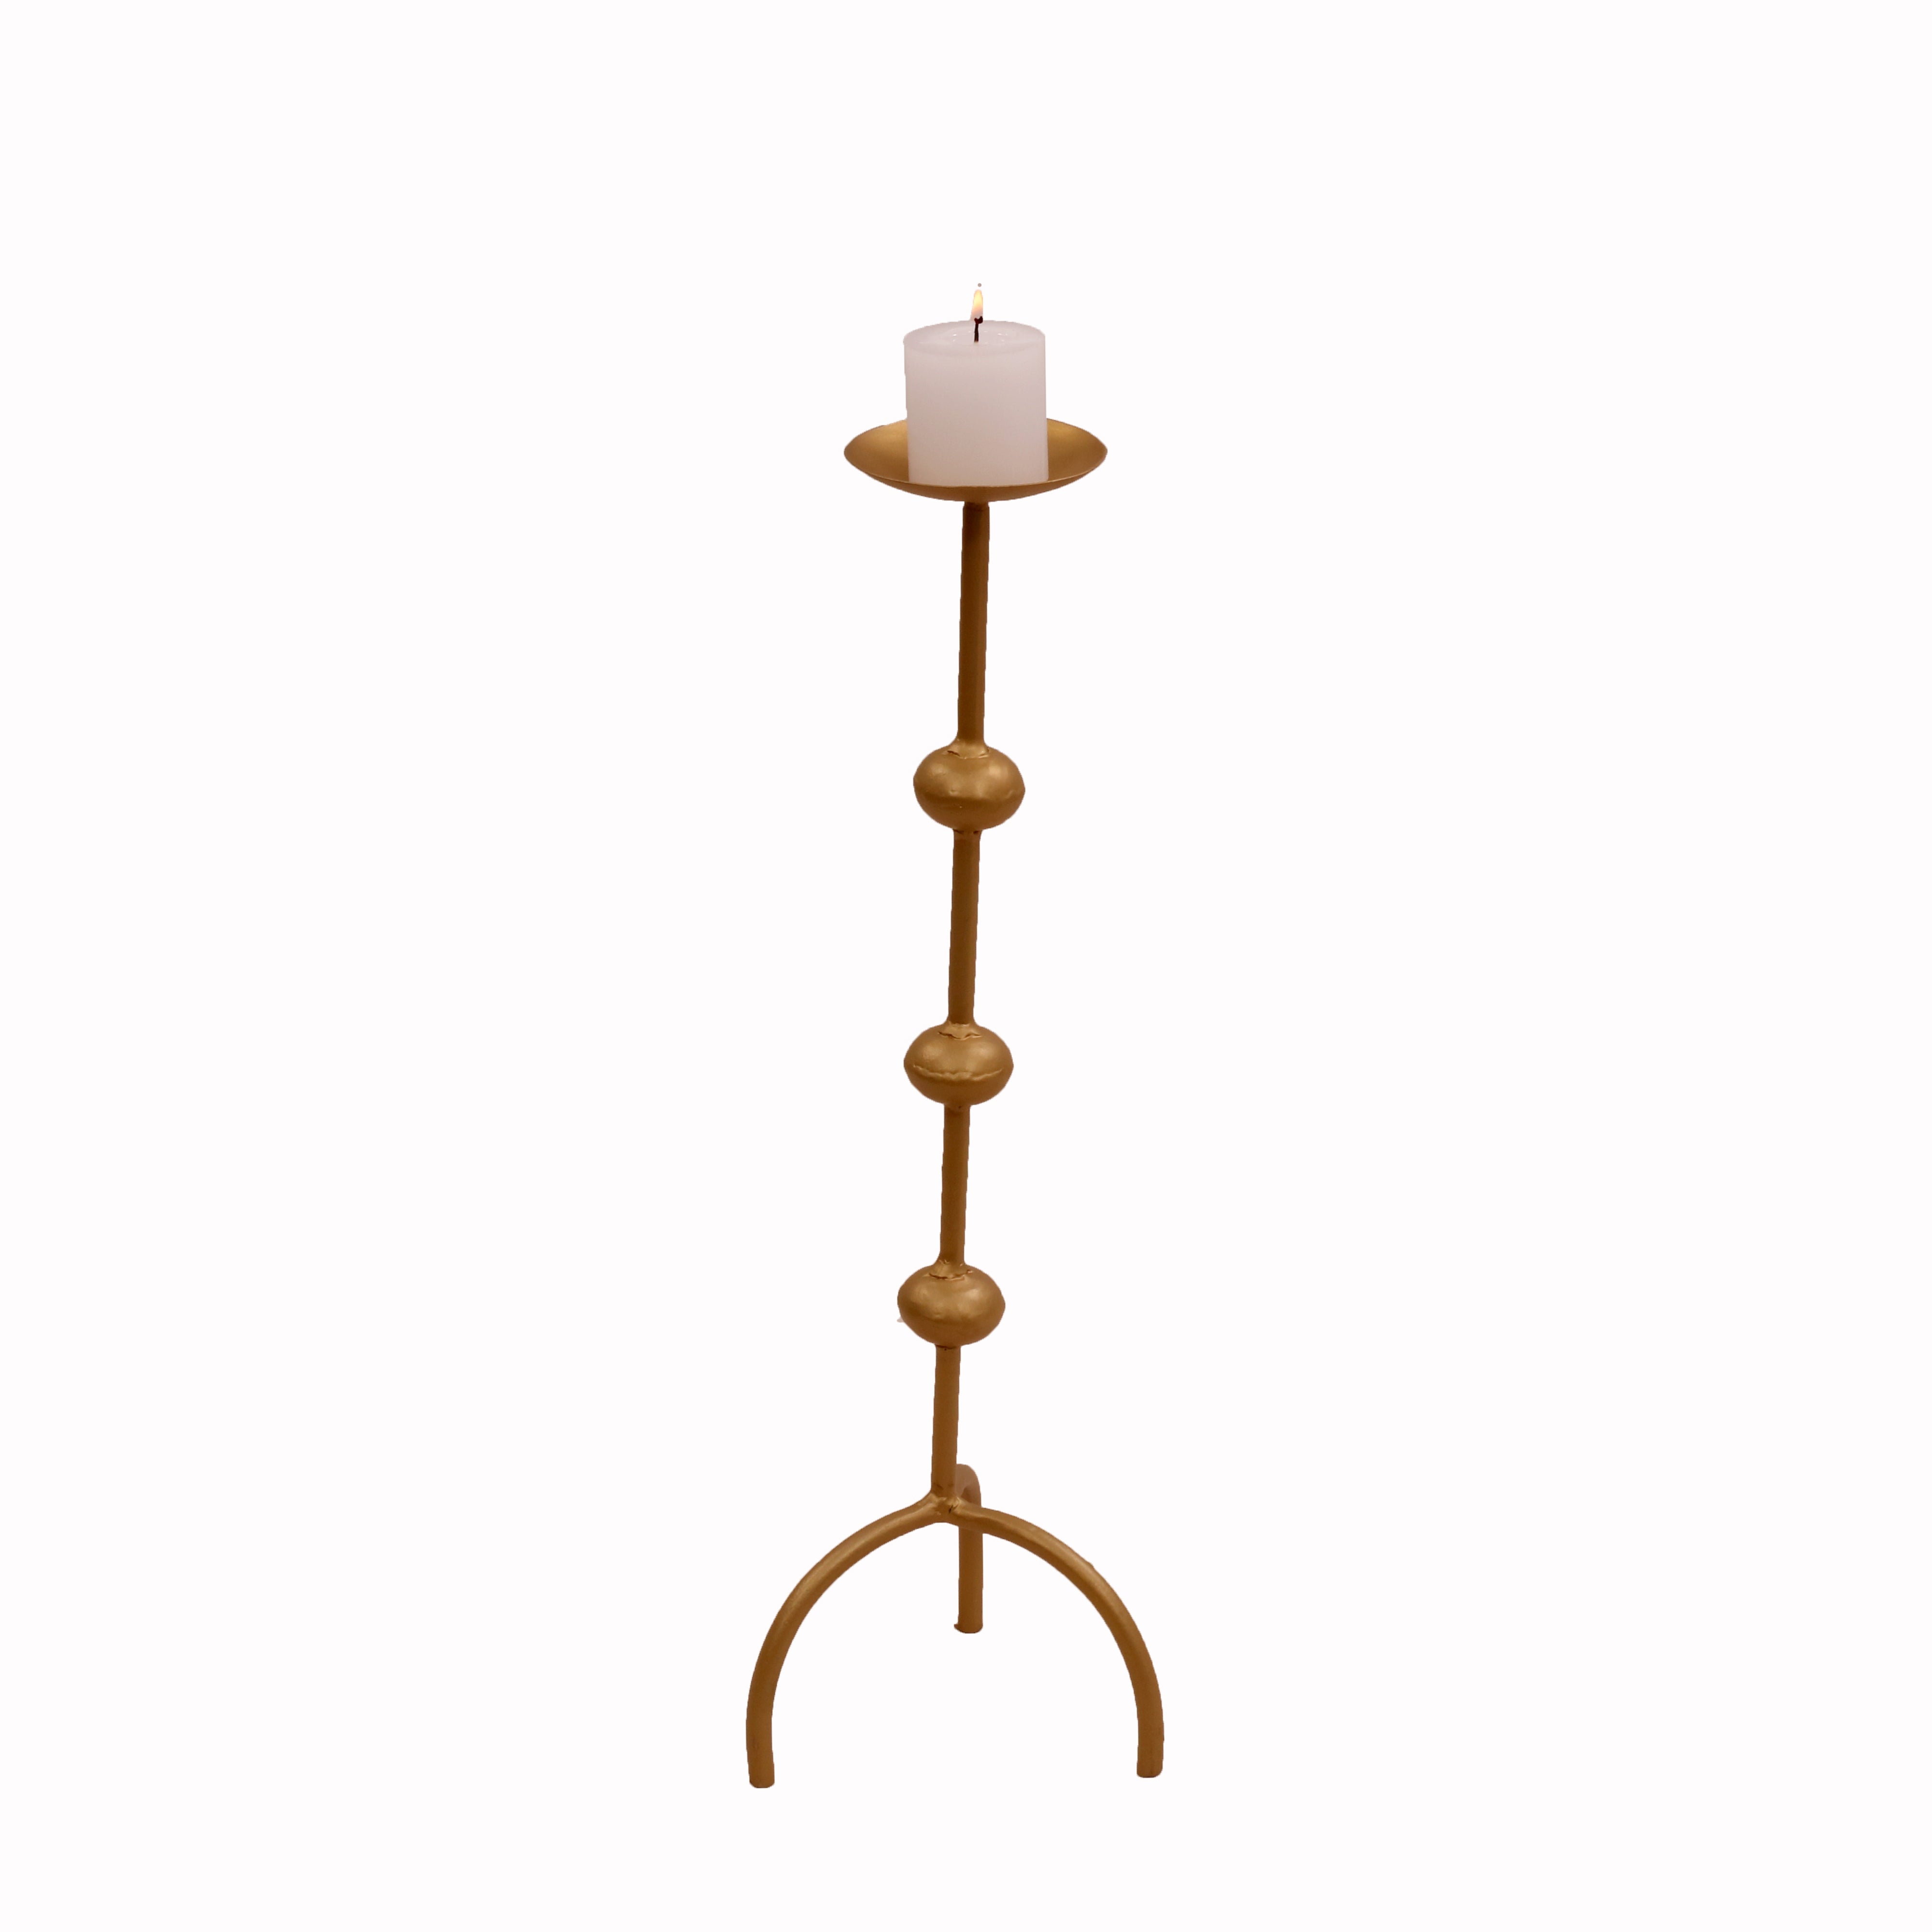 Rounded Beads Candle Stand Golden Candle Holder